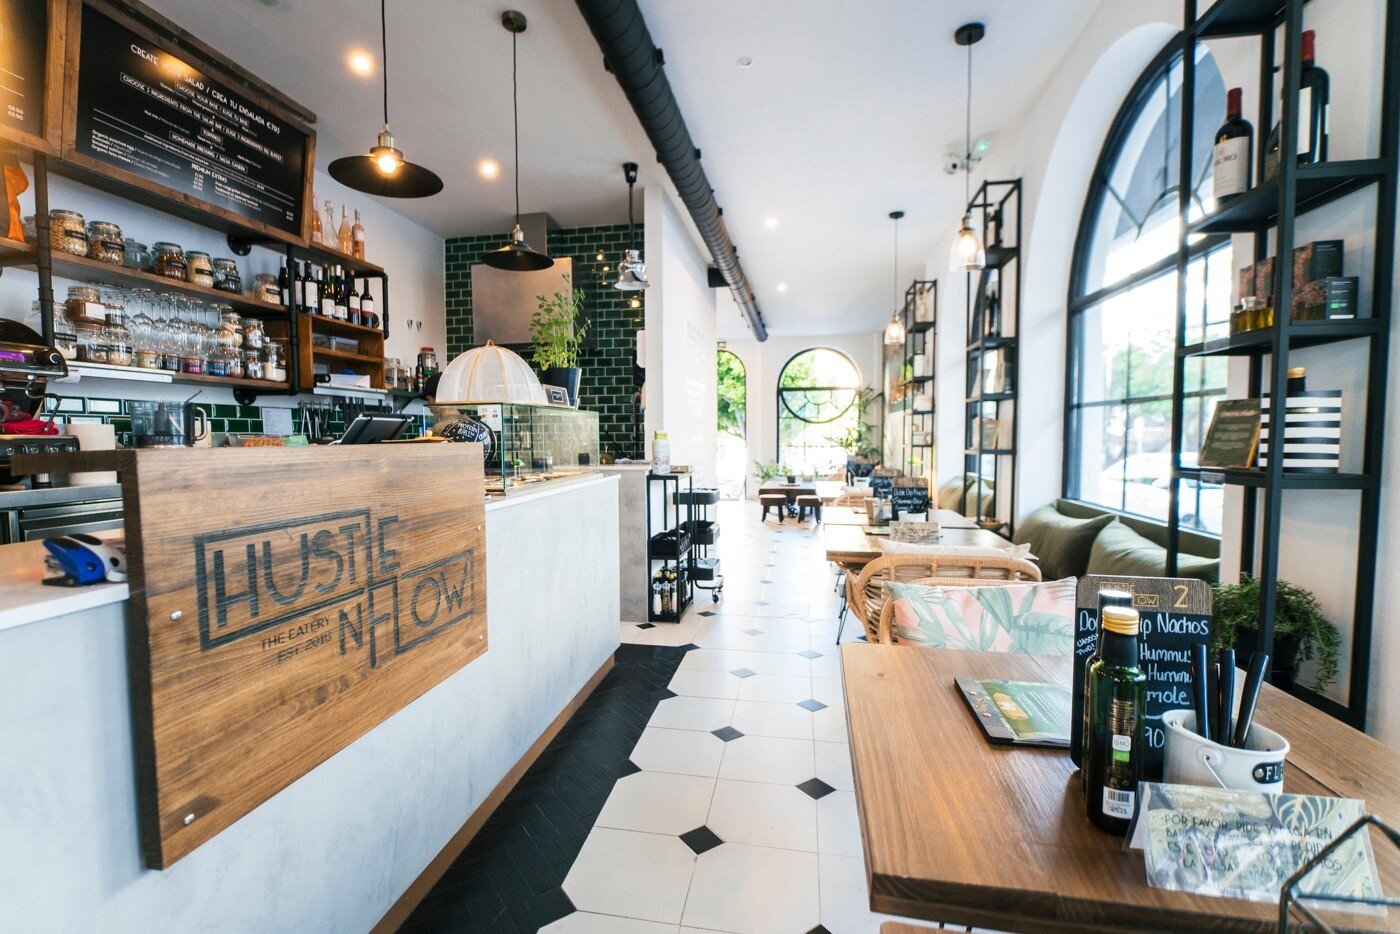 Saturday mornings like this call for brunch in the dreamiest surroundings 🍴💭 
We simply loved working on @hustlenfloweatery, creating a fresh, eclectic space that completely embodies the Hustle n&rsquo; Flow philosophy. 
Check out the delicious det